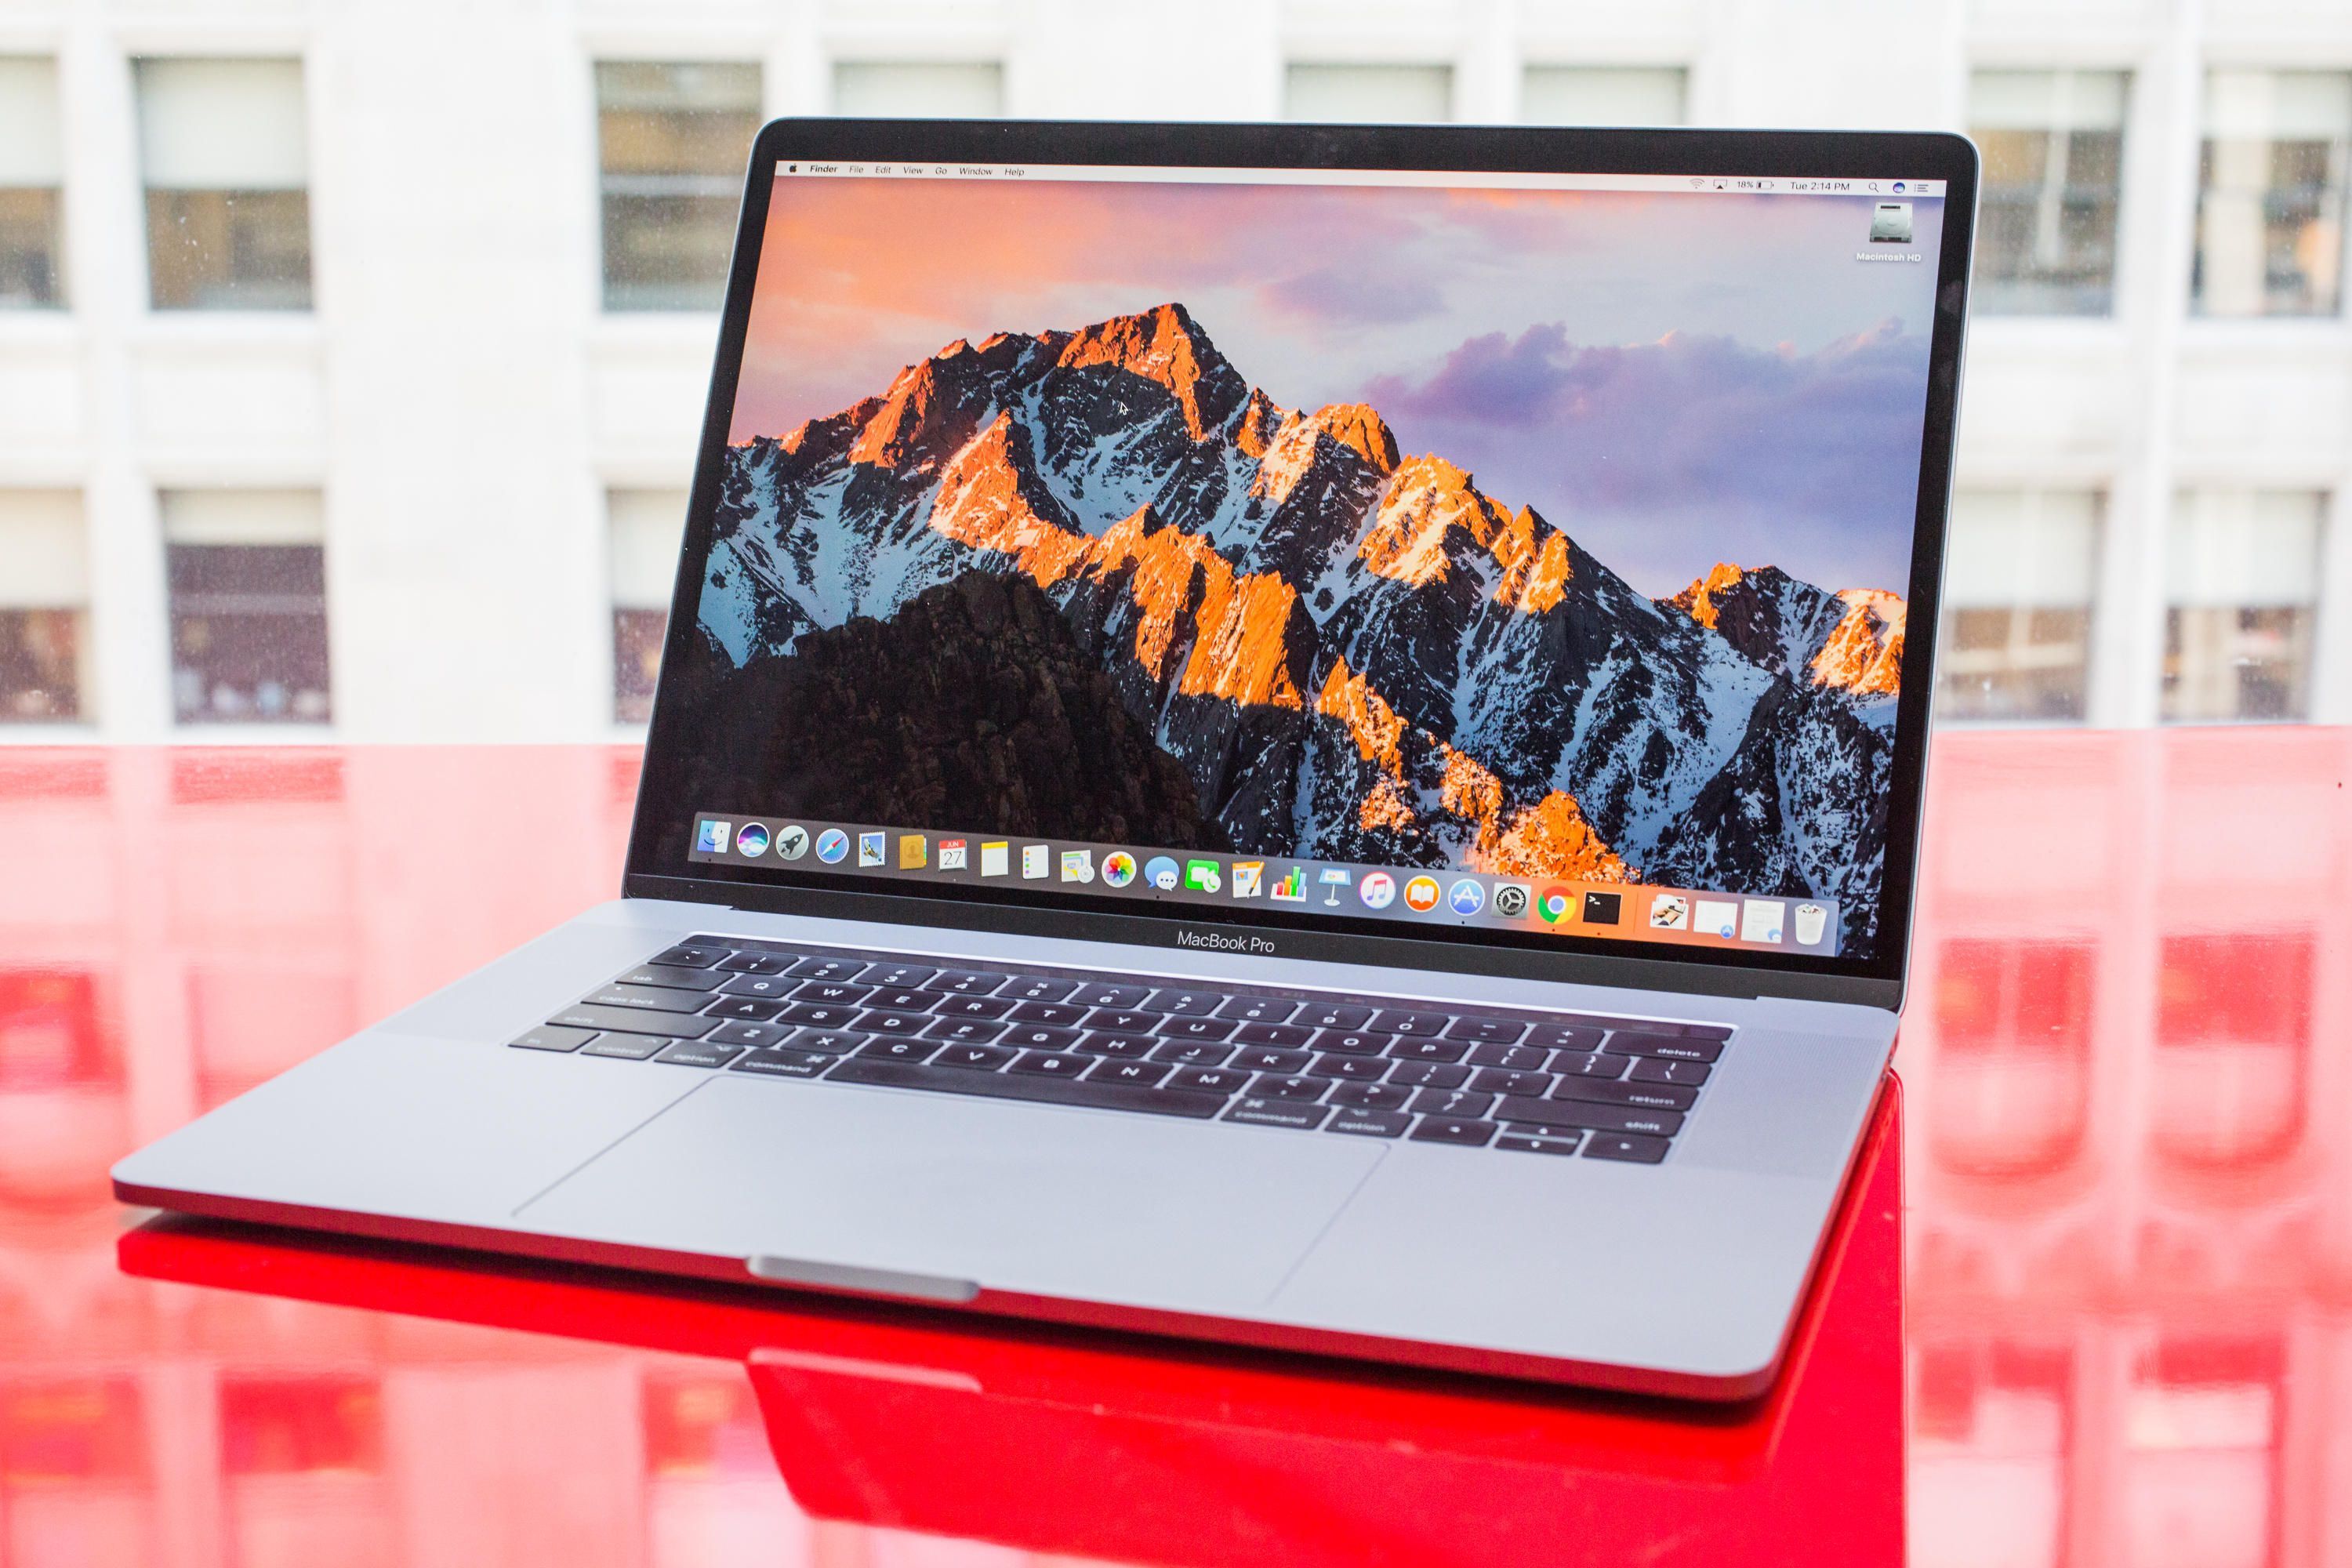 Apple Macbook Pro 15 Inch(2019): The Best Macbook Outthere?